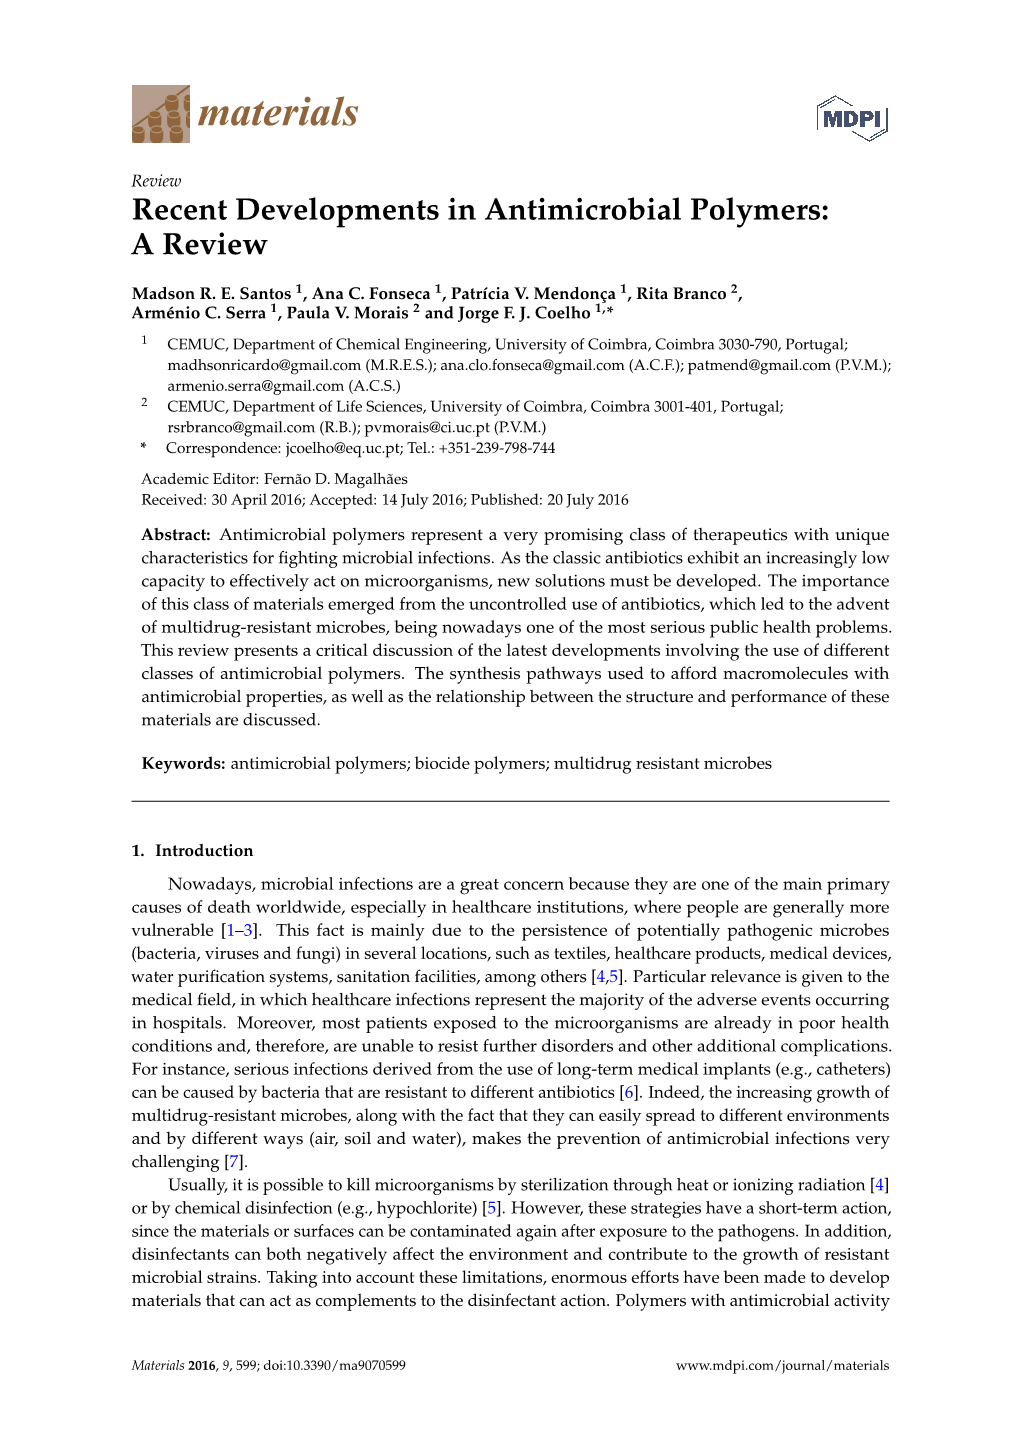 Recent Developments in Antimicrobial Polymers: a Review